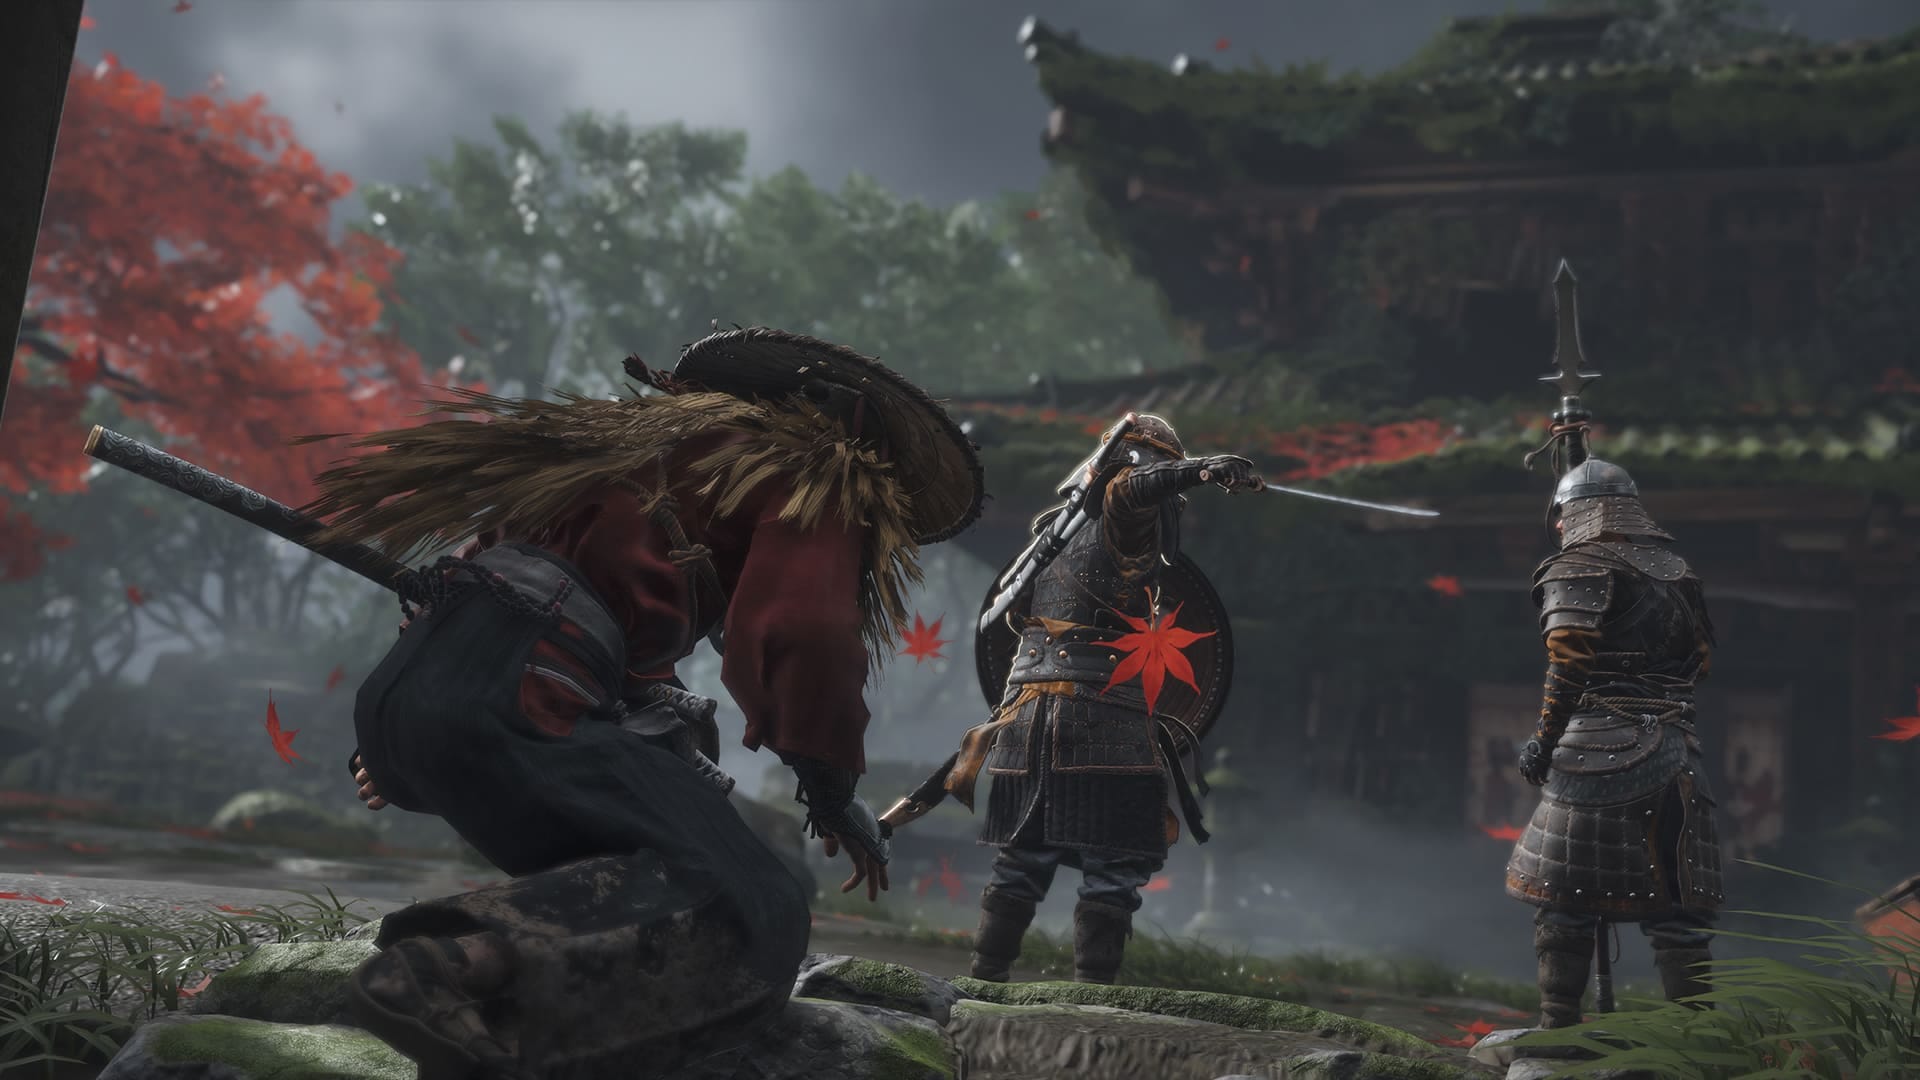 The Best Game Music of 2020 - Ghost of Tsushima